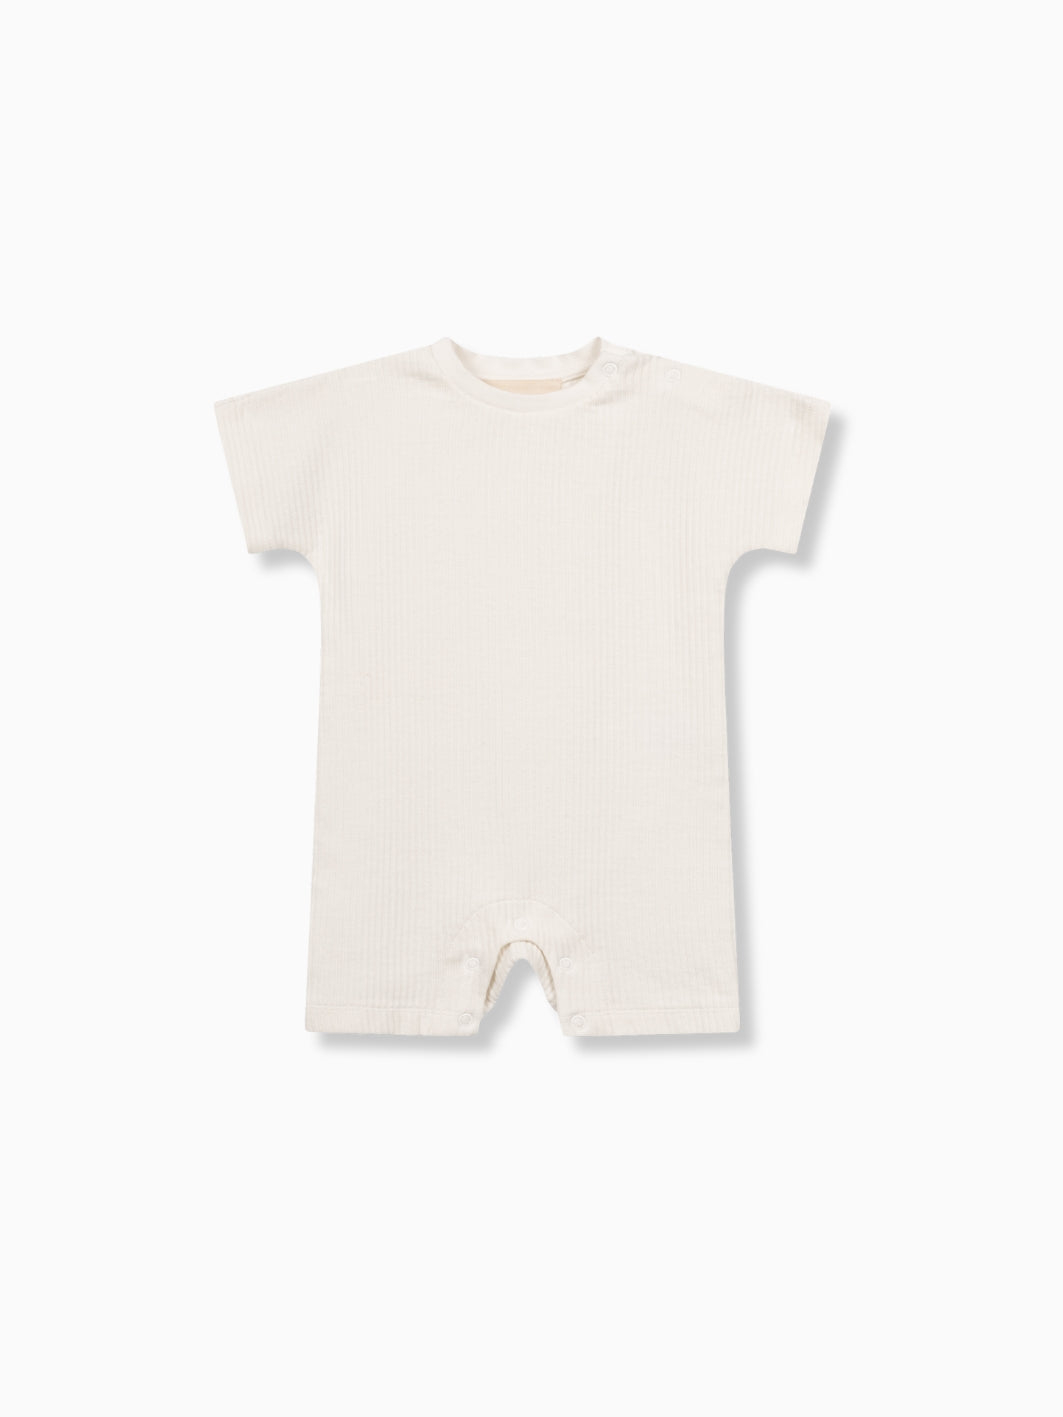 Ribbed Romper Baby - FAMVIBES 